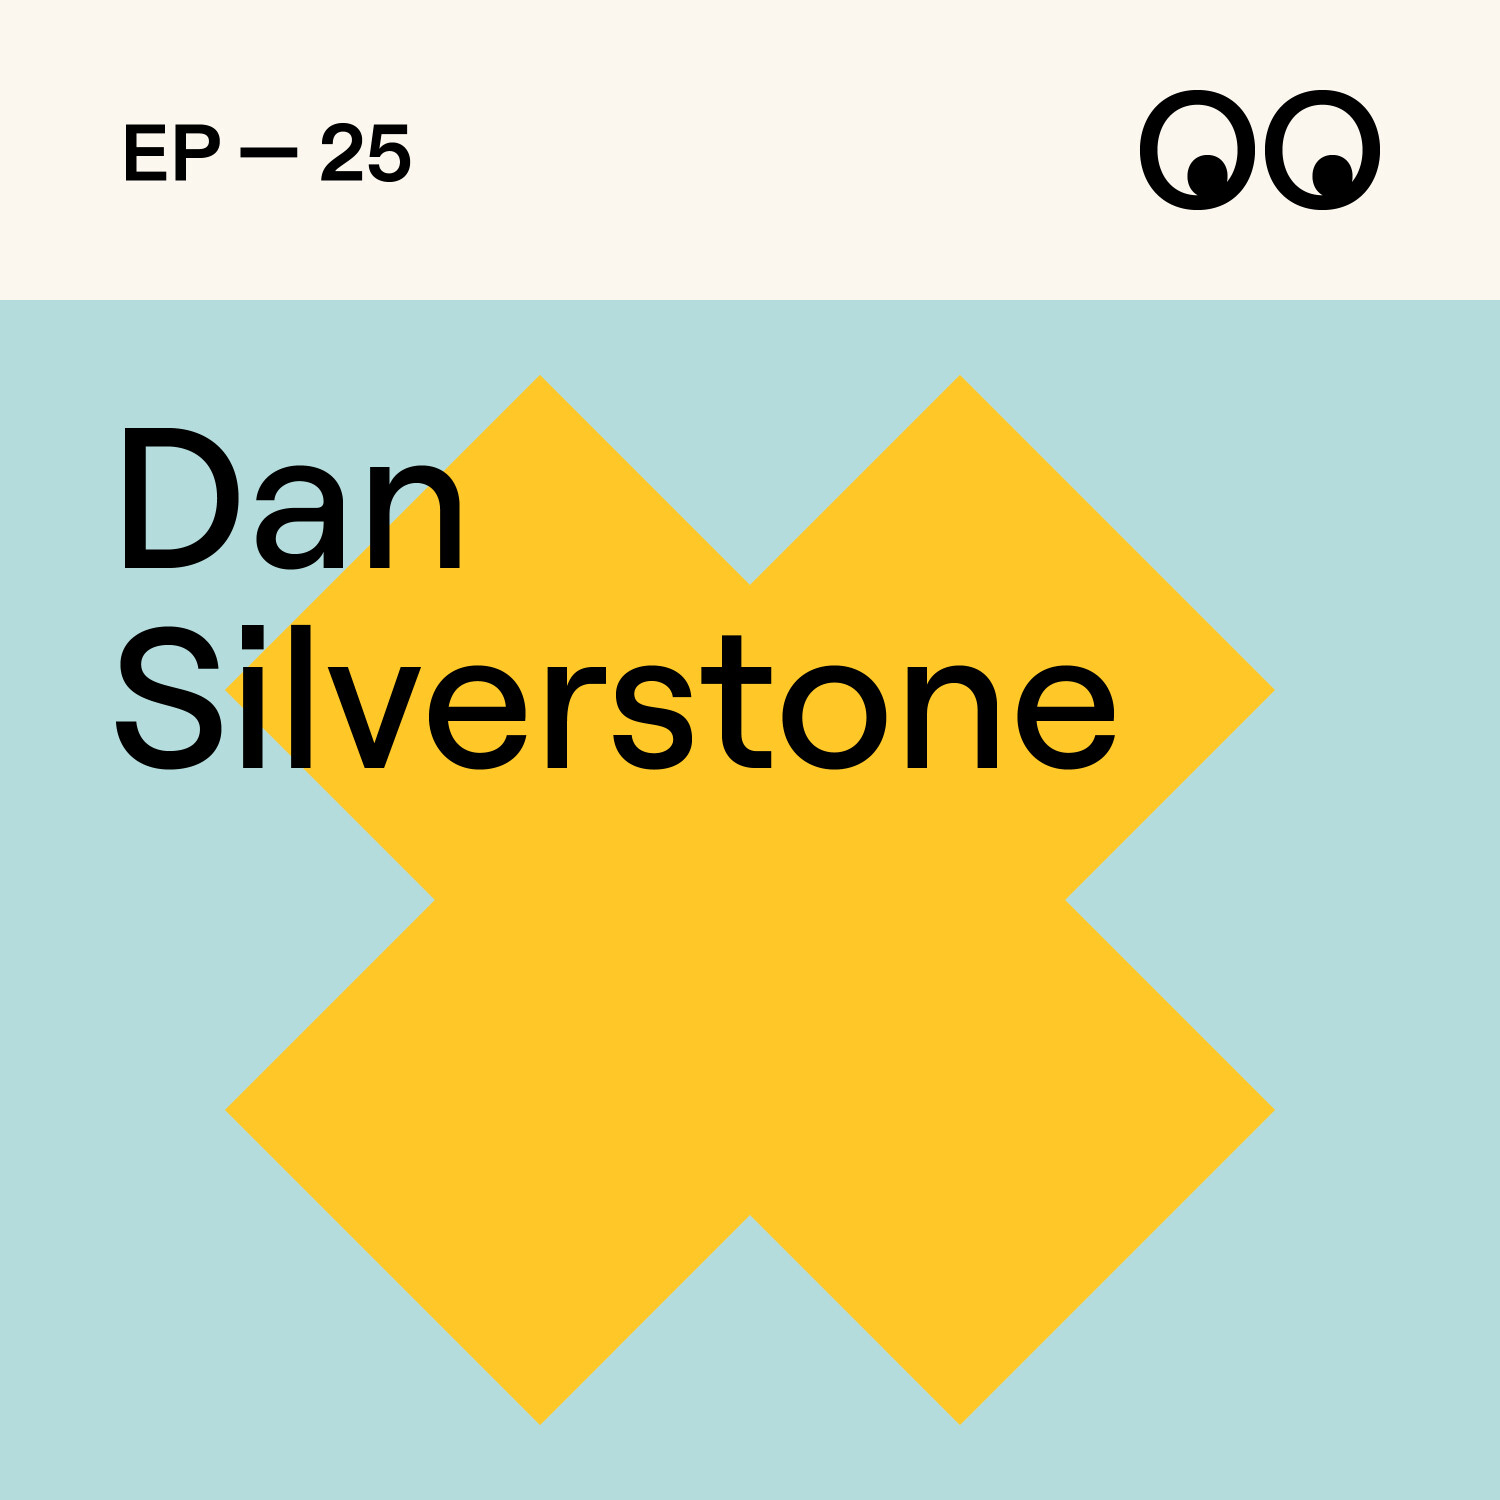 Switching to motion design and doing what you love, with Dan Silverstone